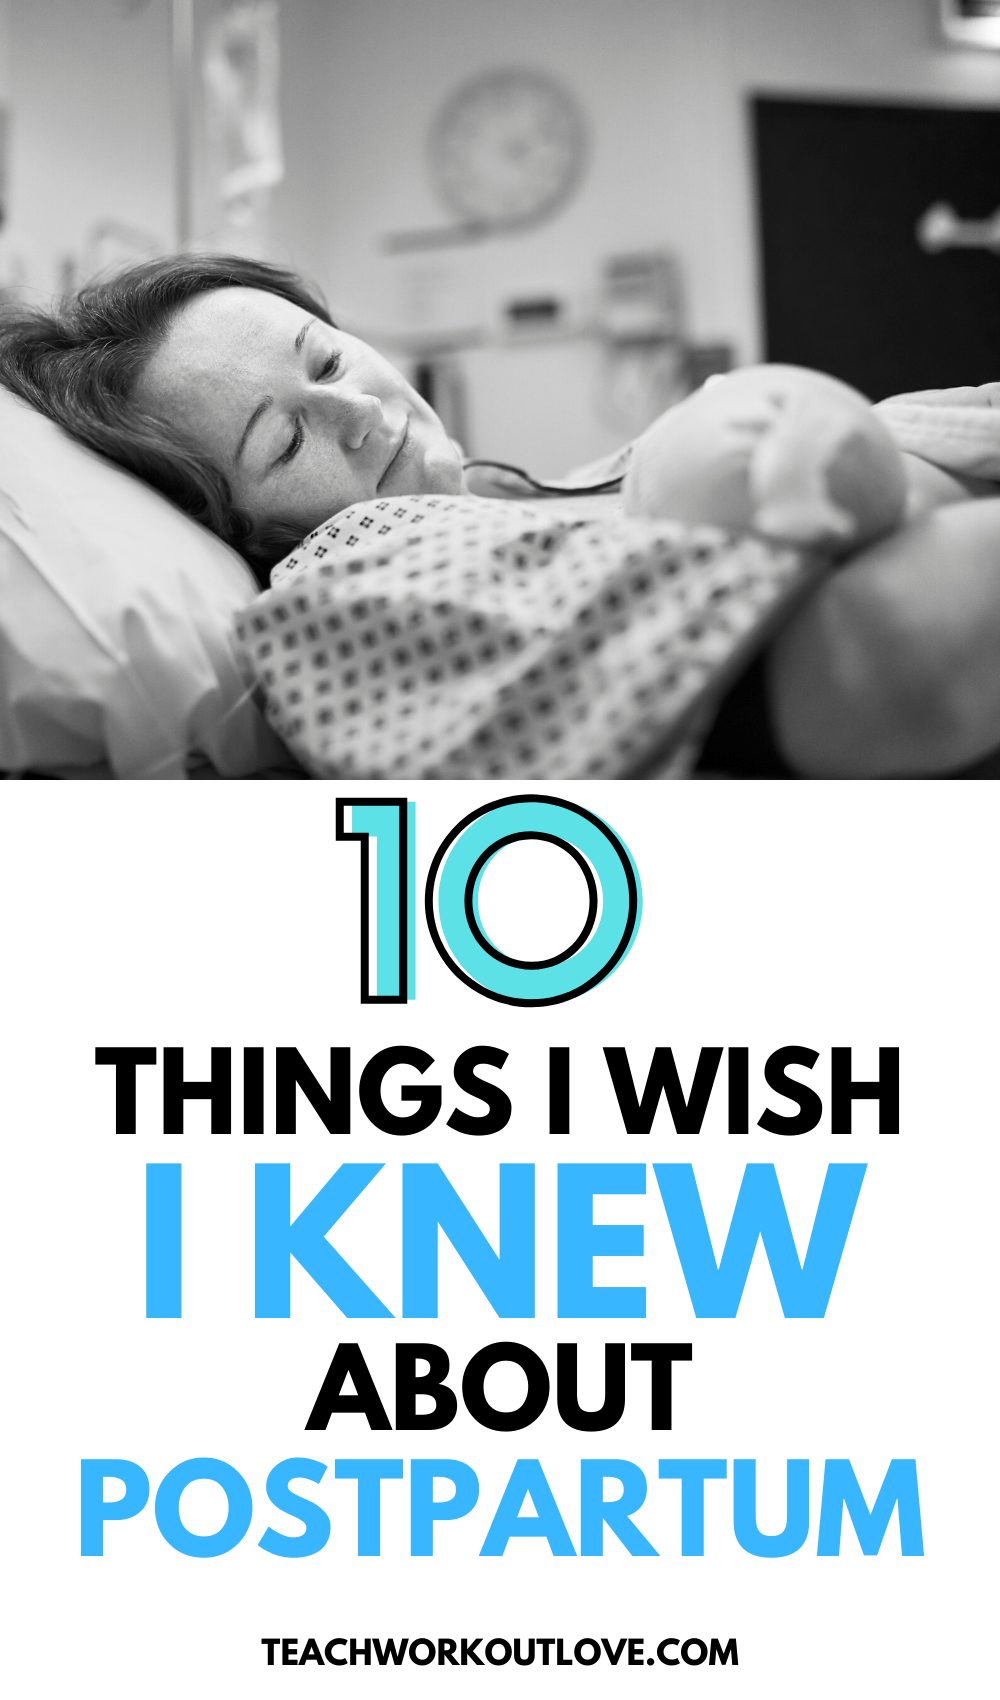 Postpartum times are not an easy time for mamas. Here's 10 things I wish I knew about postpartum that I would tell my pregnant self.